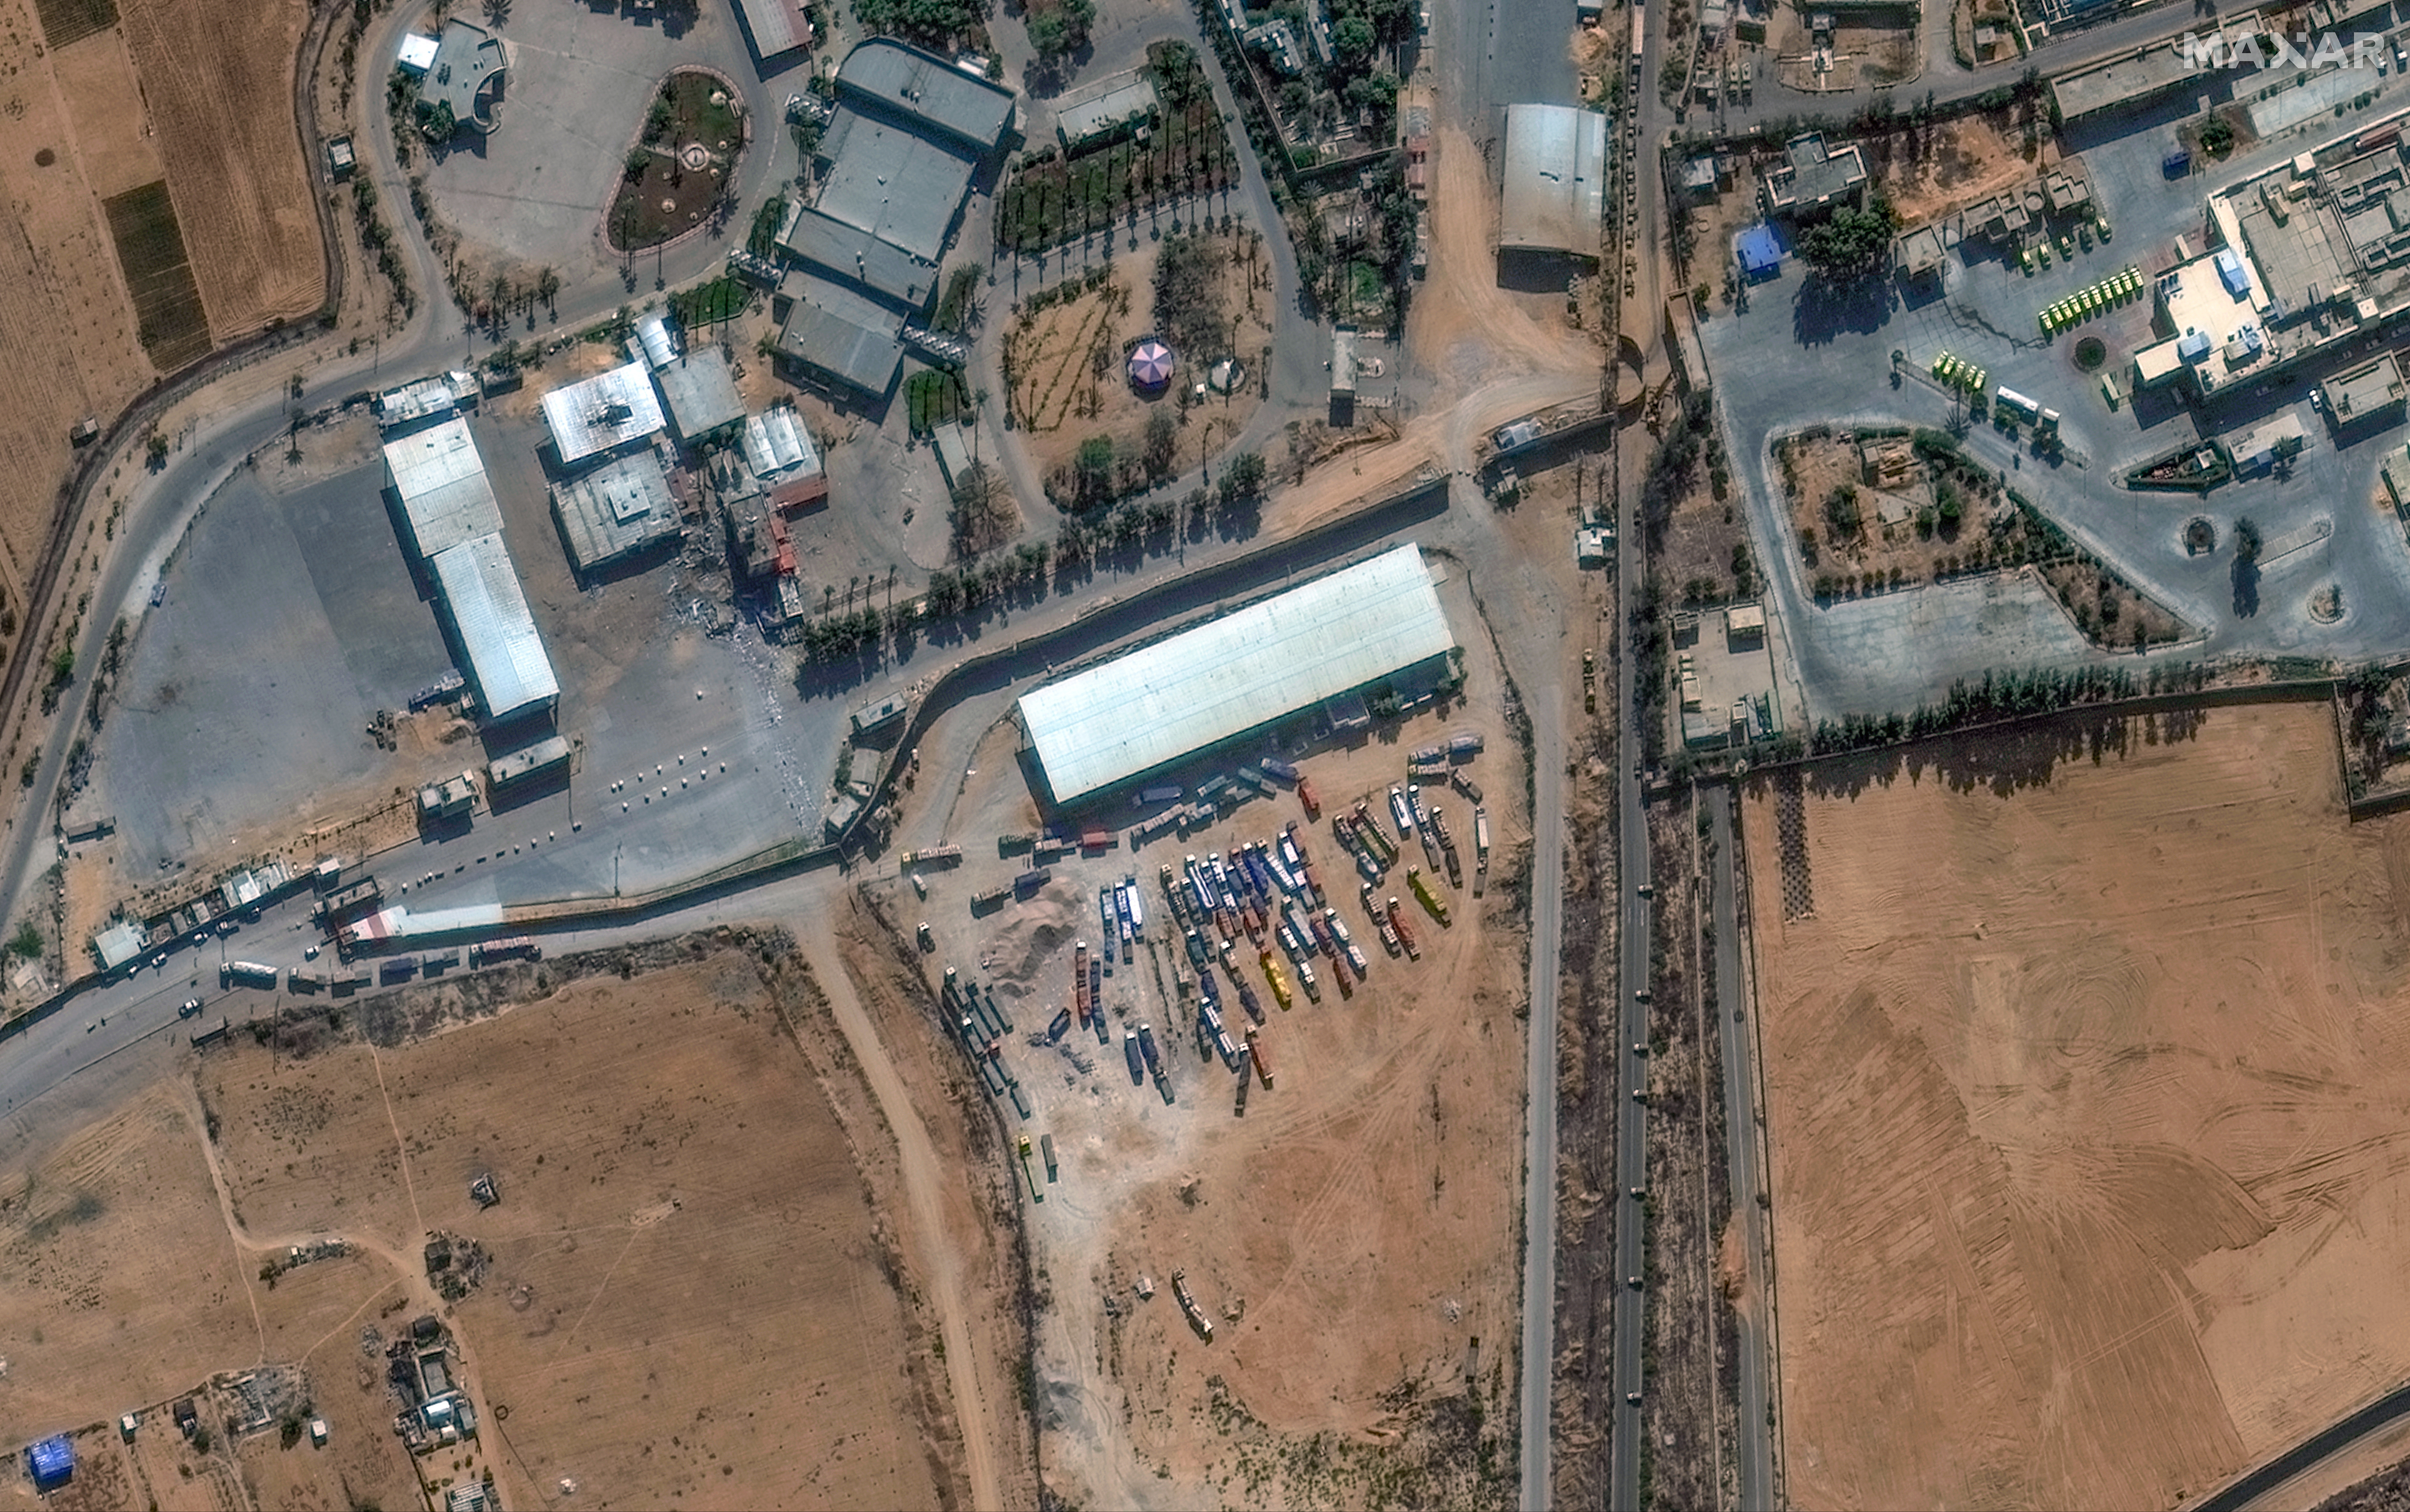 A satellite image shows a closer view of the Rafah border crossing